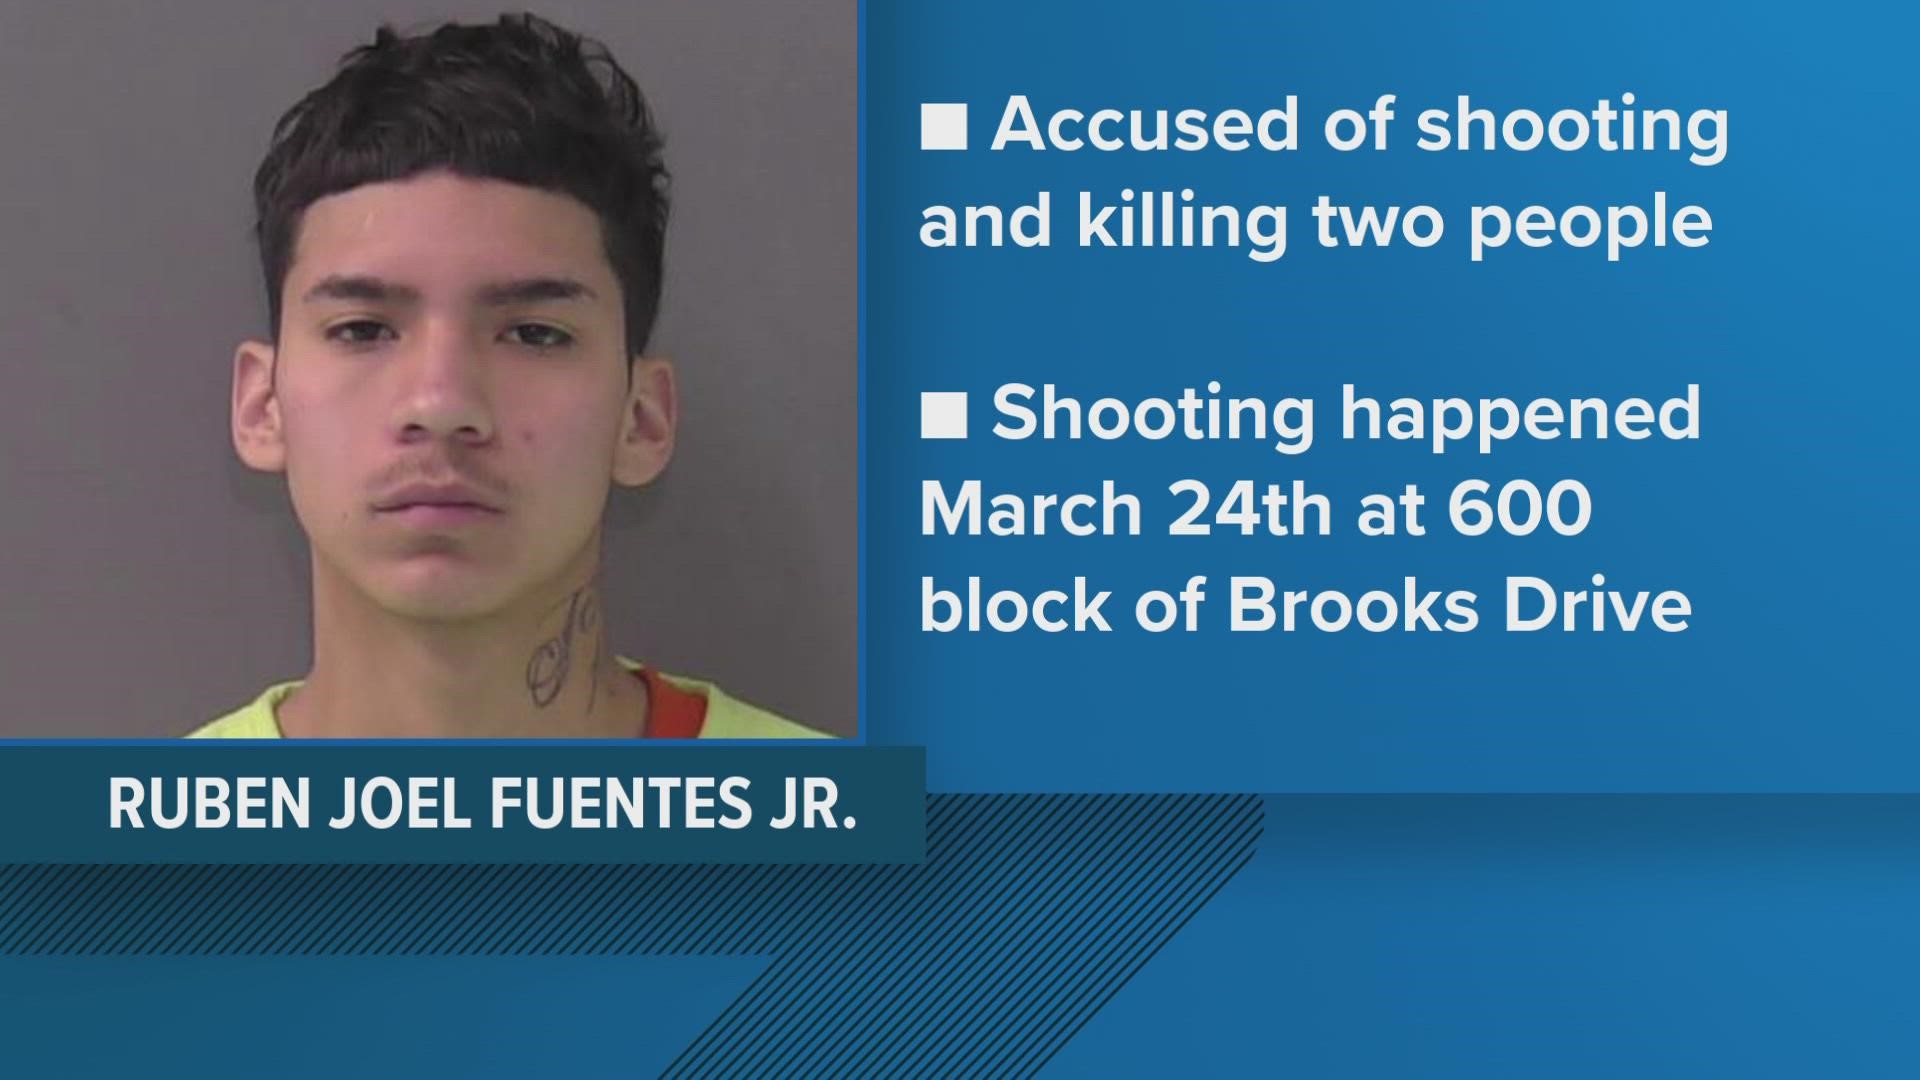 Ruben Joel Fuentes Jr. is accused of shooting and killing Revierra Elizabeth Aline Gibson, 18, and a 15-year-old boy back in March.